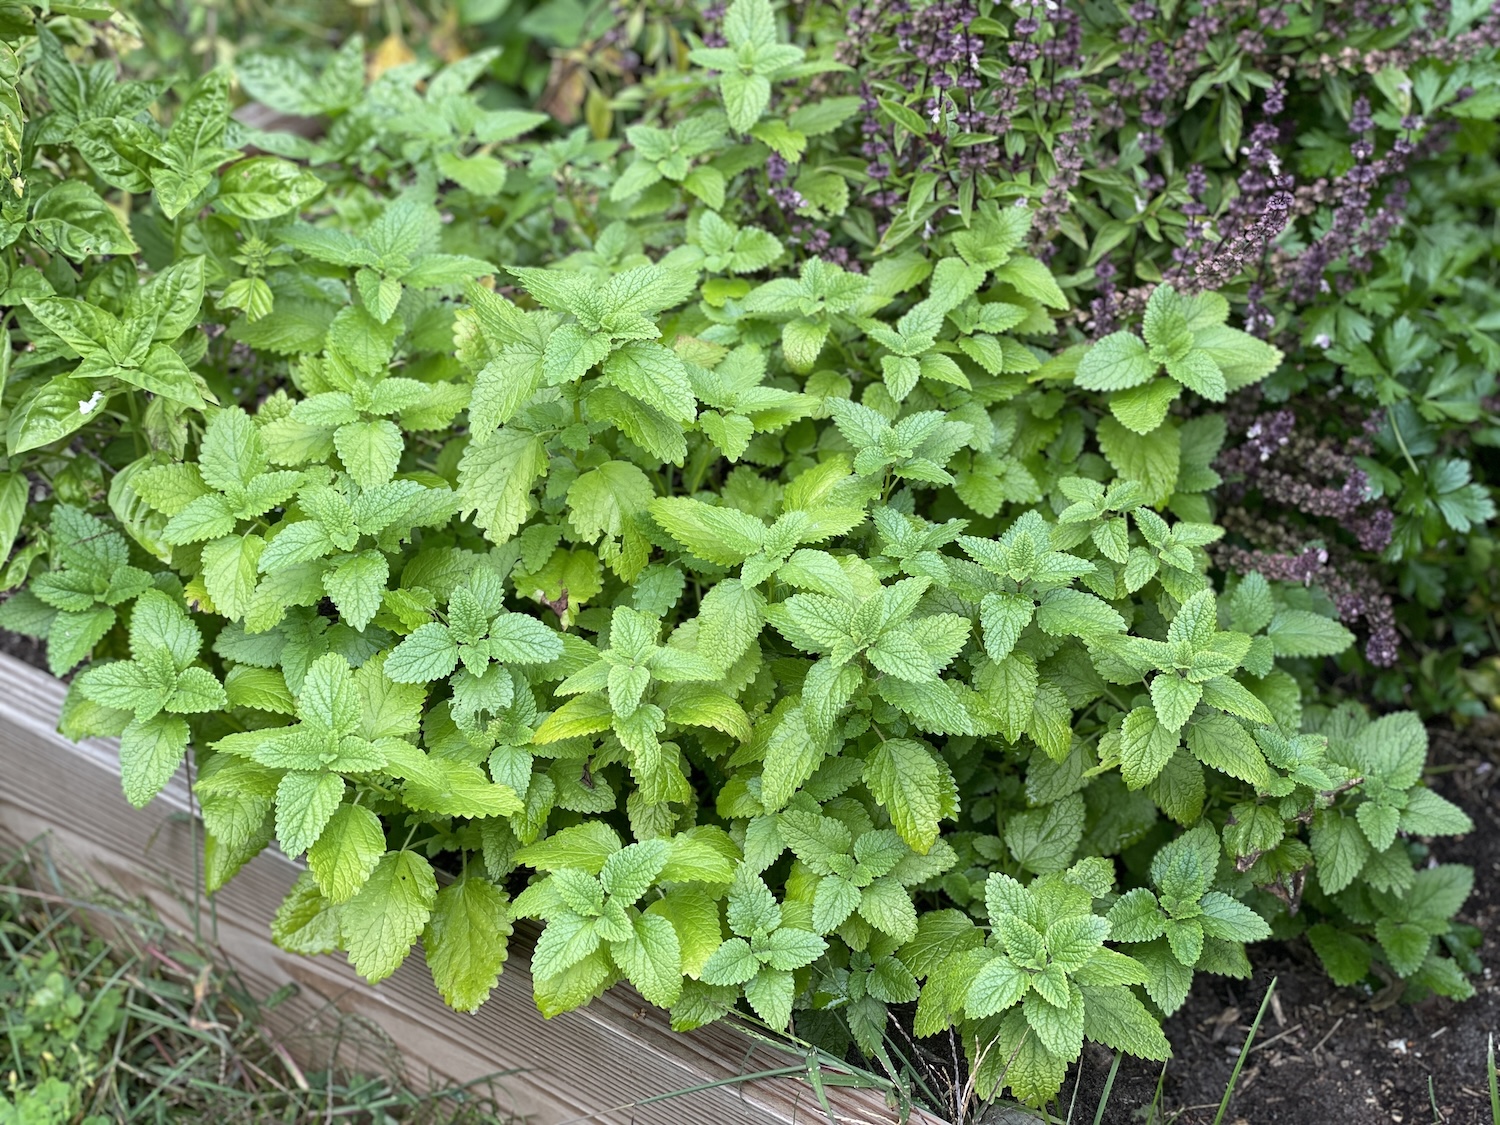 Different herbs growing in a raised bed garden